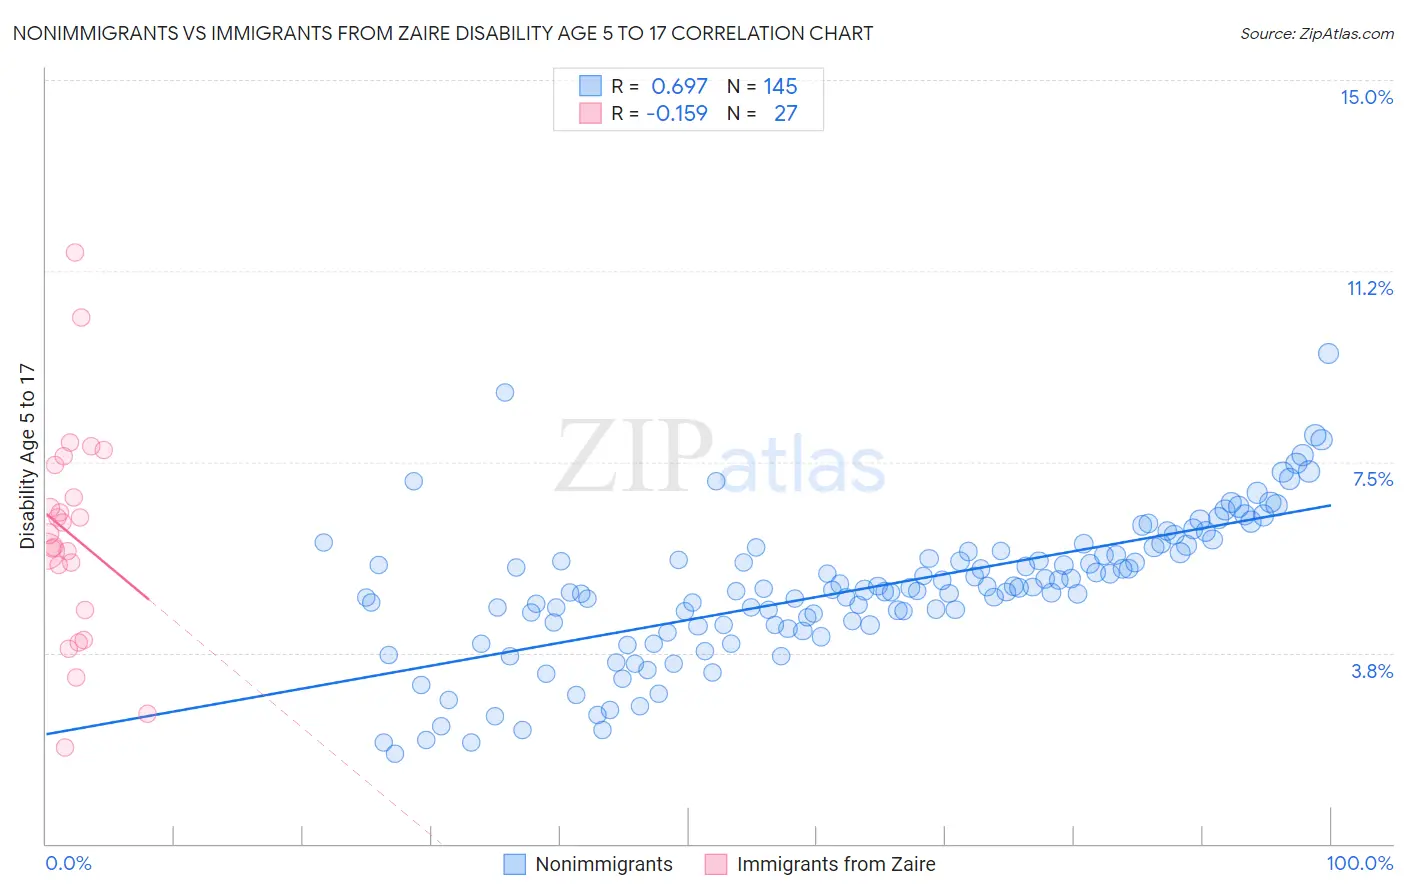 Nonimmigrants vs Immigrants from Zaire Disability Age 5 to 17